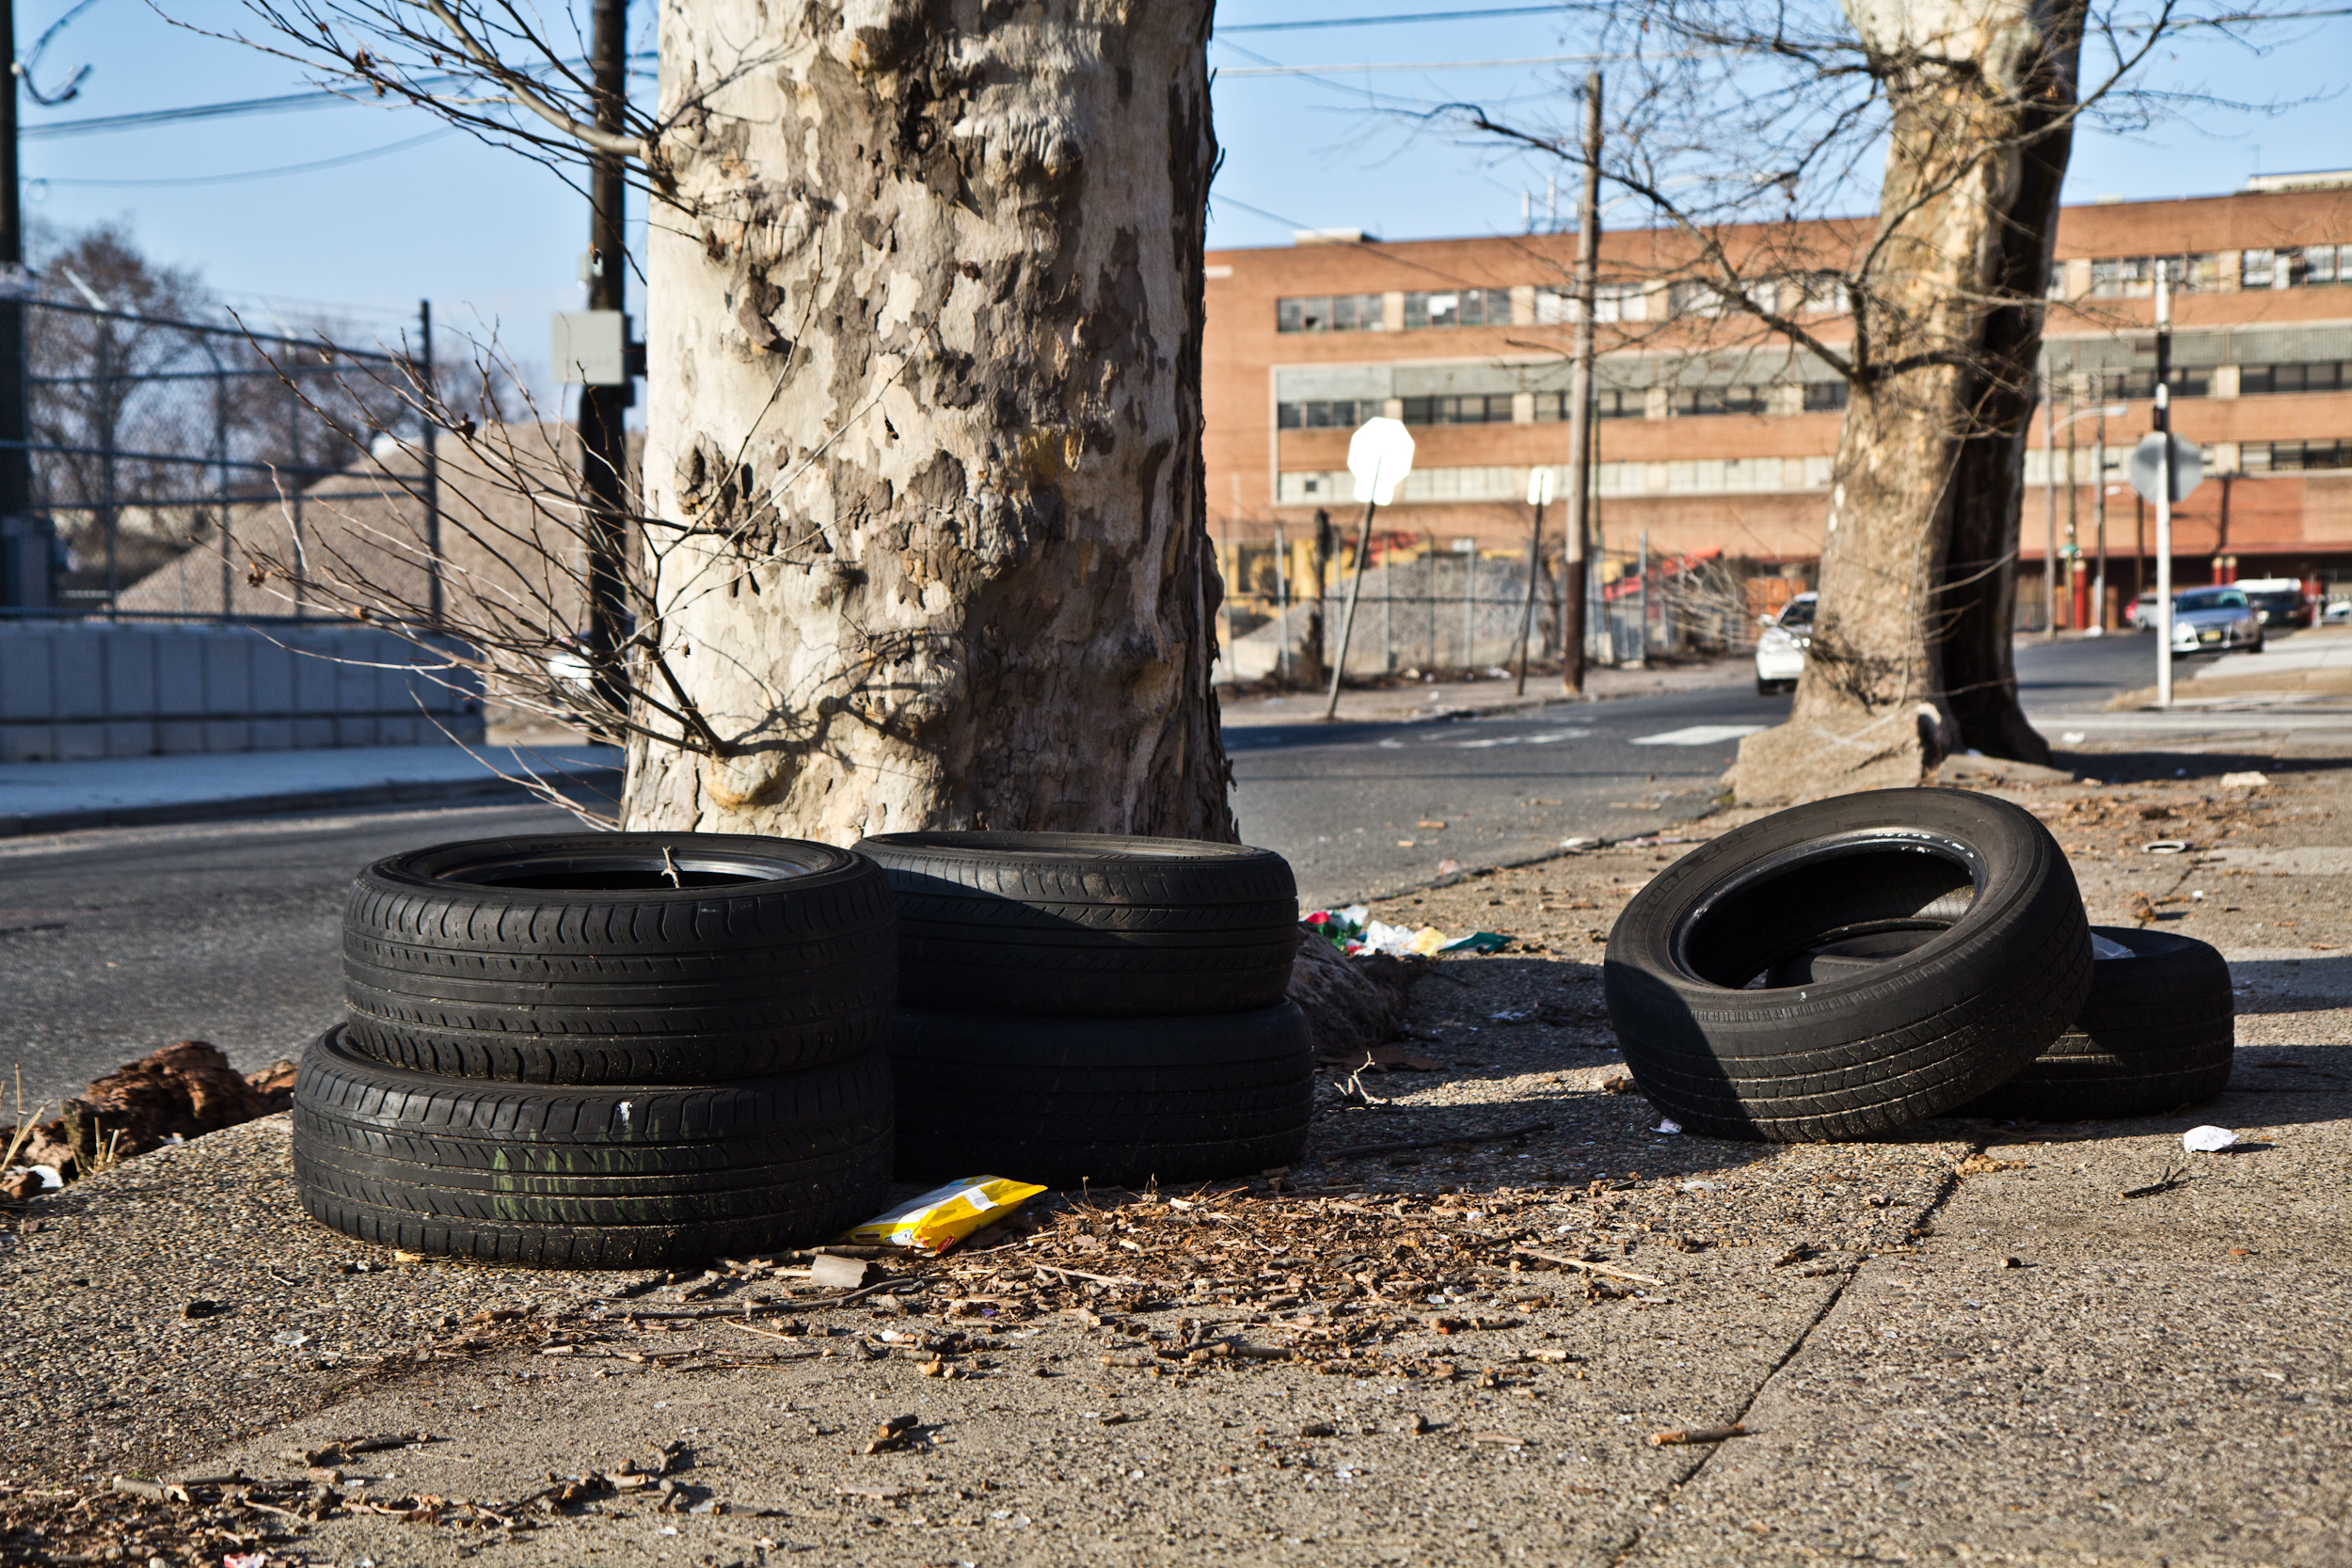 Ontario and C streets is rated a “3” on Philadelphia’s Litter Index. (Kimberly Paynter/WHYY)